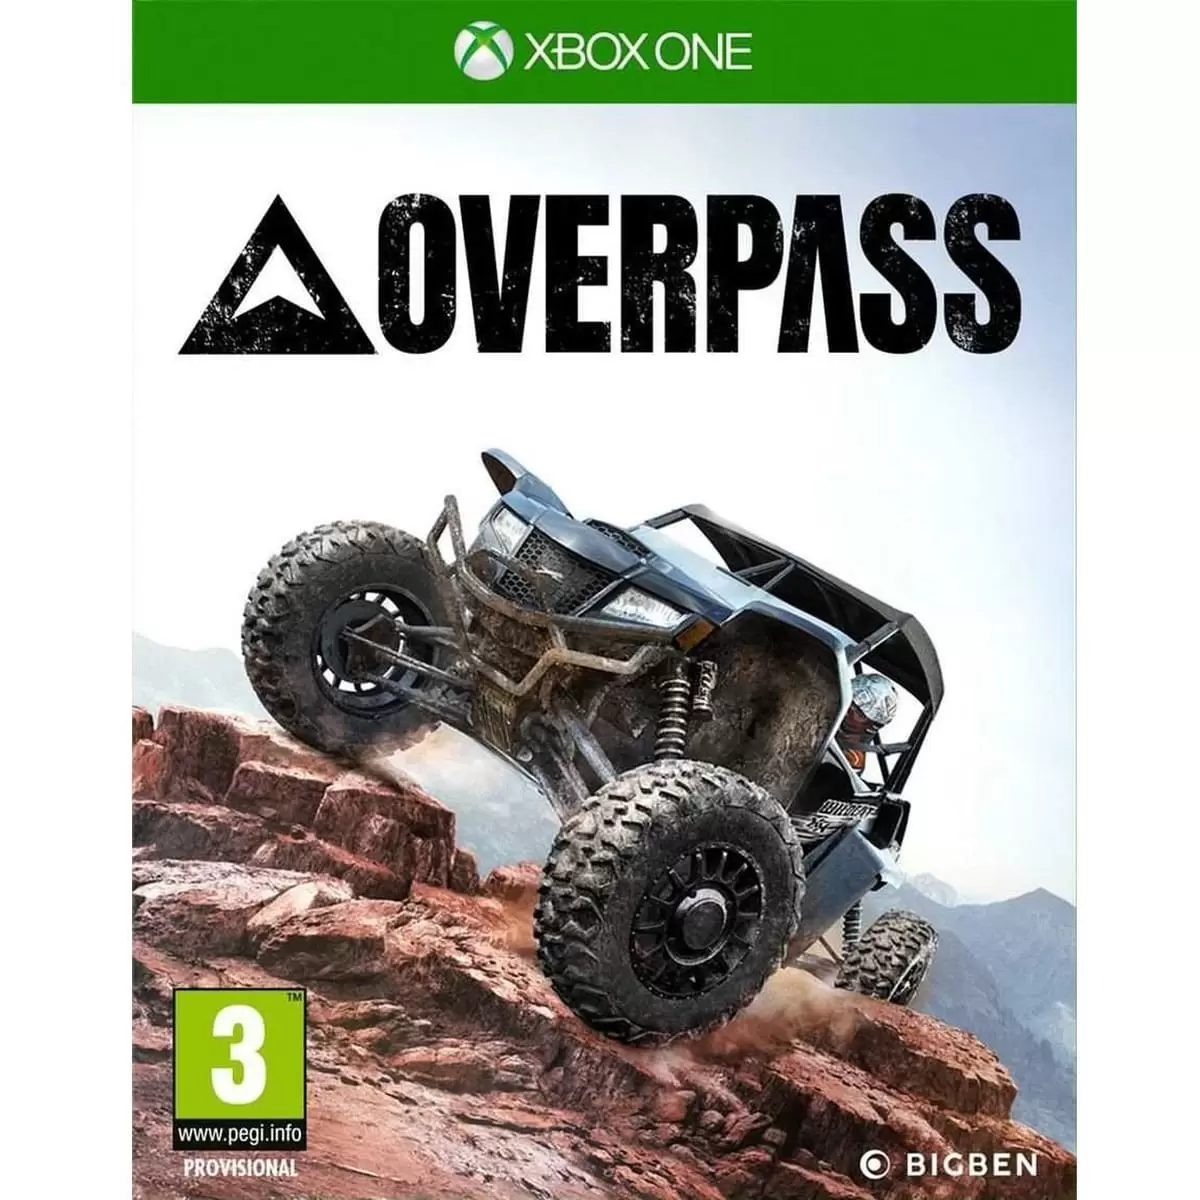 XBOX One Games - Overpass